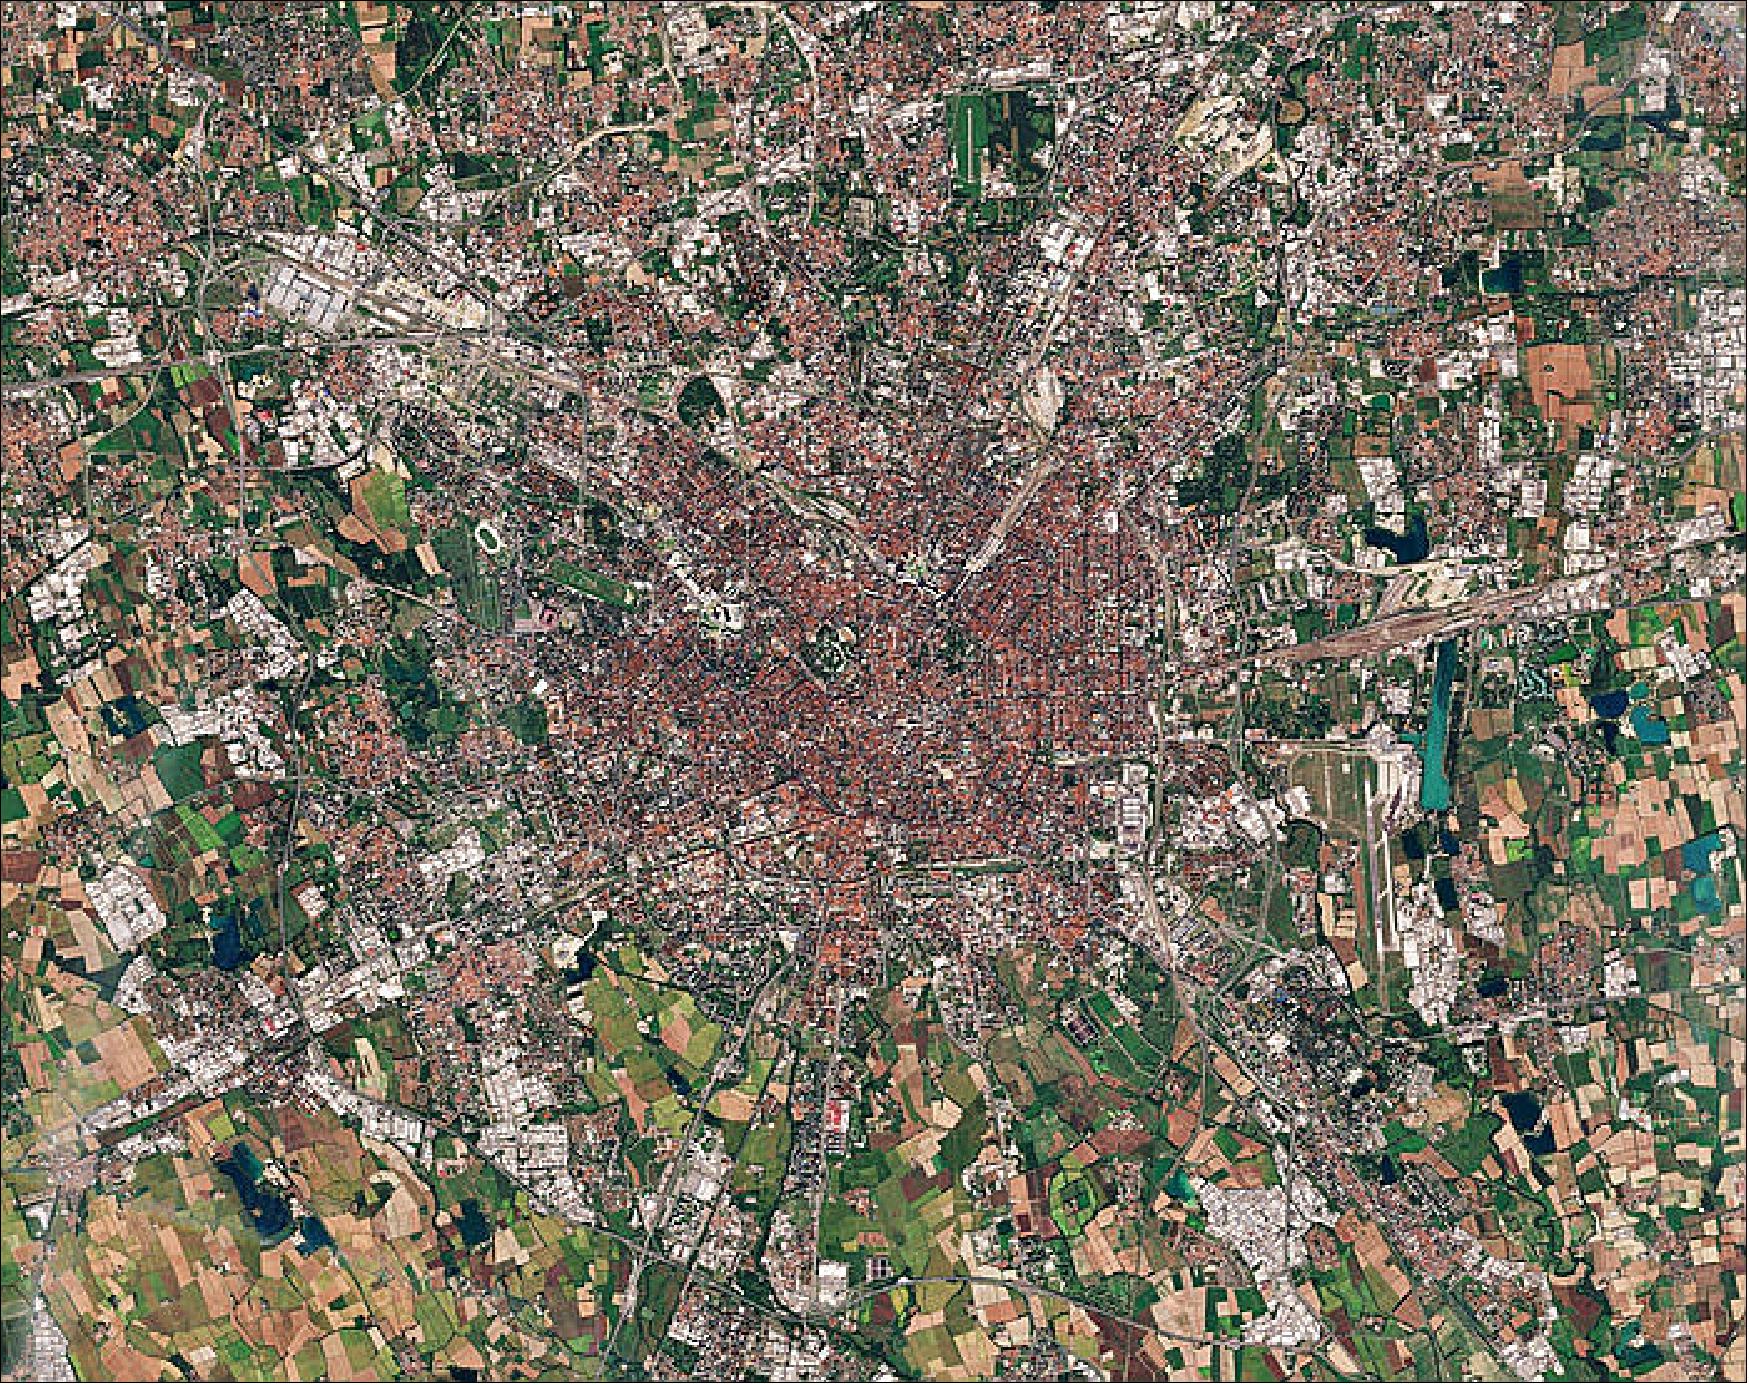 Figure 32: In this high-resolution image, captured by Copernicus Sentinel-2 orbiting around 800 km above, the center of Milan is clearly visible. The famous Milan Cathedral or Duomo di Milano with its surrounding square can be seen in the center of the image. Taking six centuries to complete, it is one of the largest gothic cathedrals in the world. This image, also featured on the Earth from Space video program, was captured on 24 September 2018 by the Copernicus Sentinel-2 mission. (image credit: ESA, the image contains modified Copernicus Sentinel data (2018), processed by ESA, CC BY-SA 3.0 IGO)